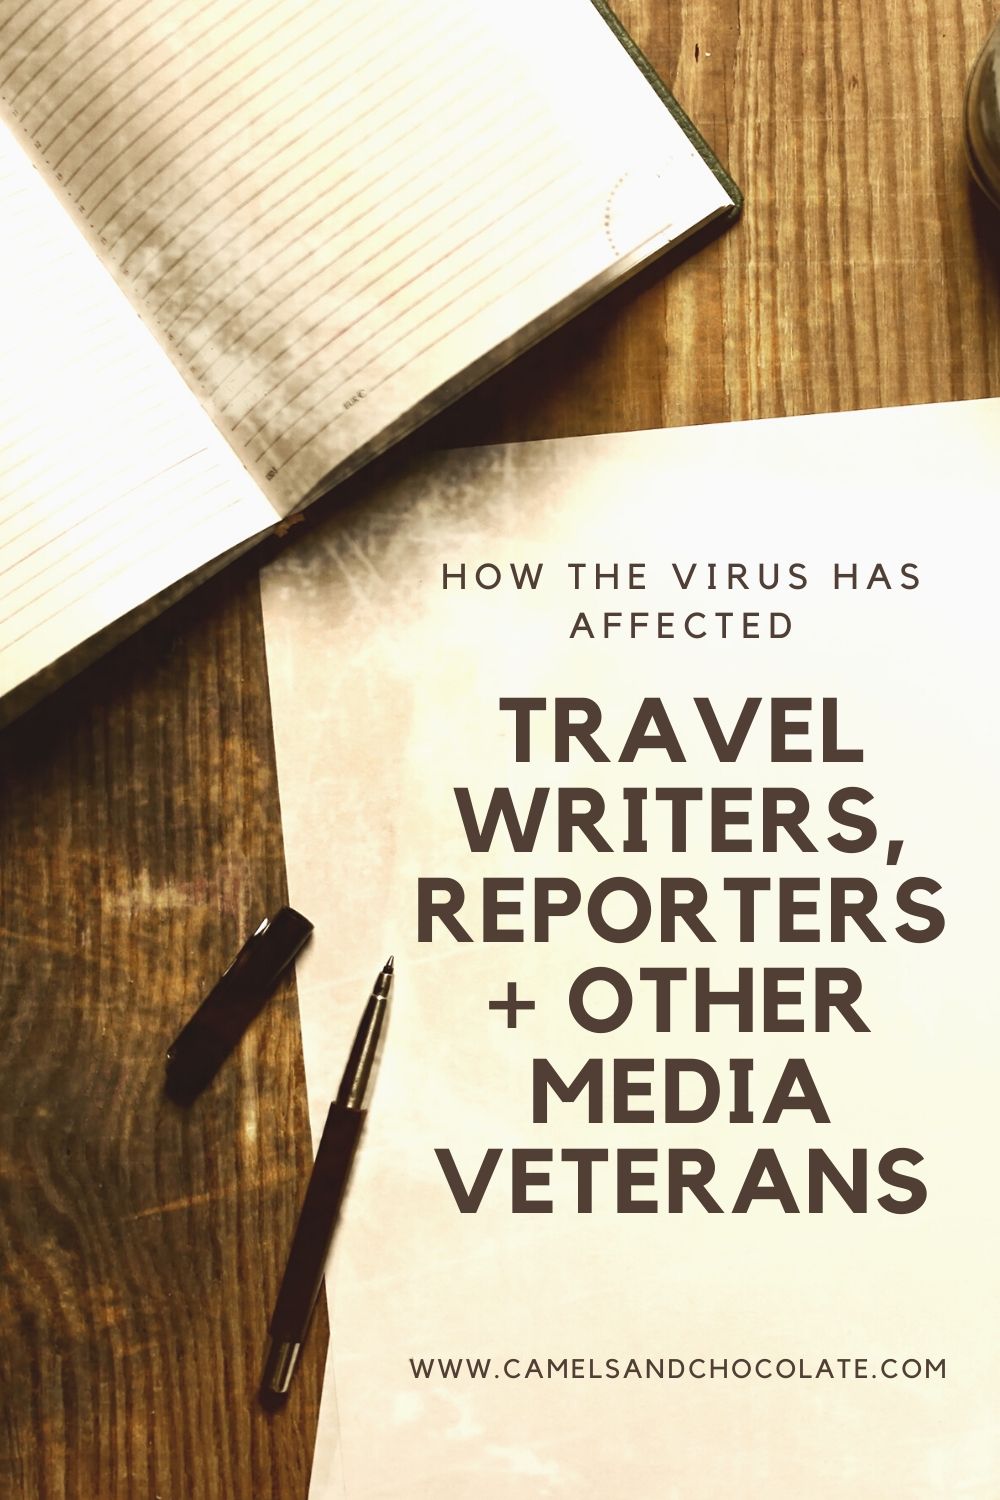 How the Pandemic Affects Travel Writers and Journalists